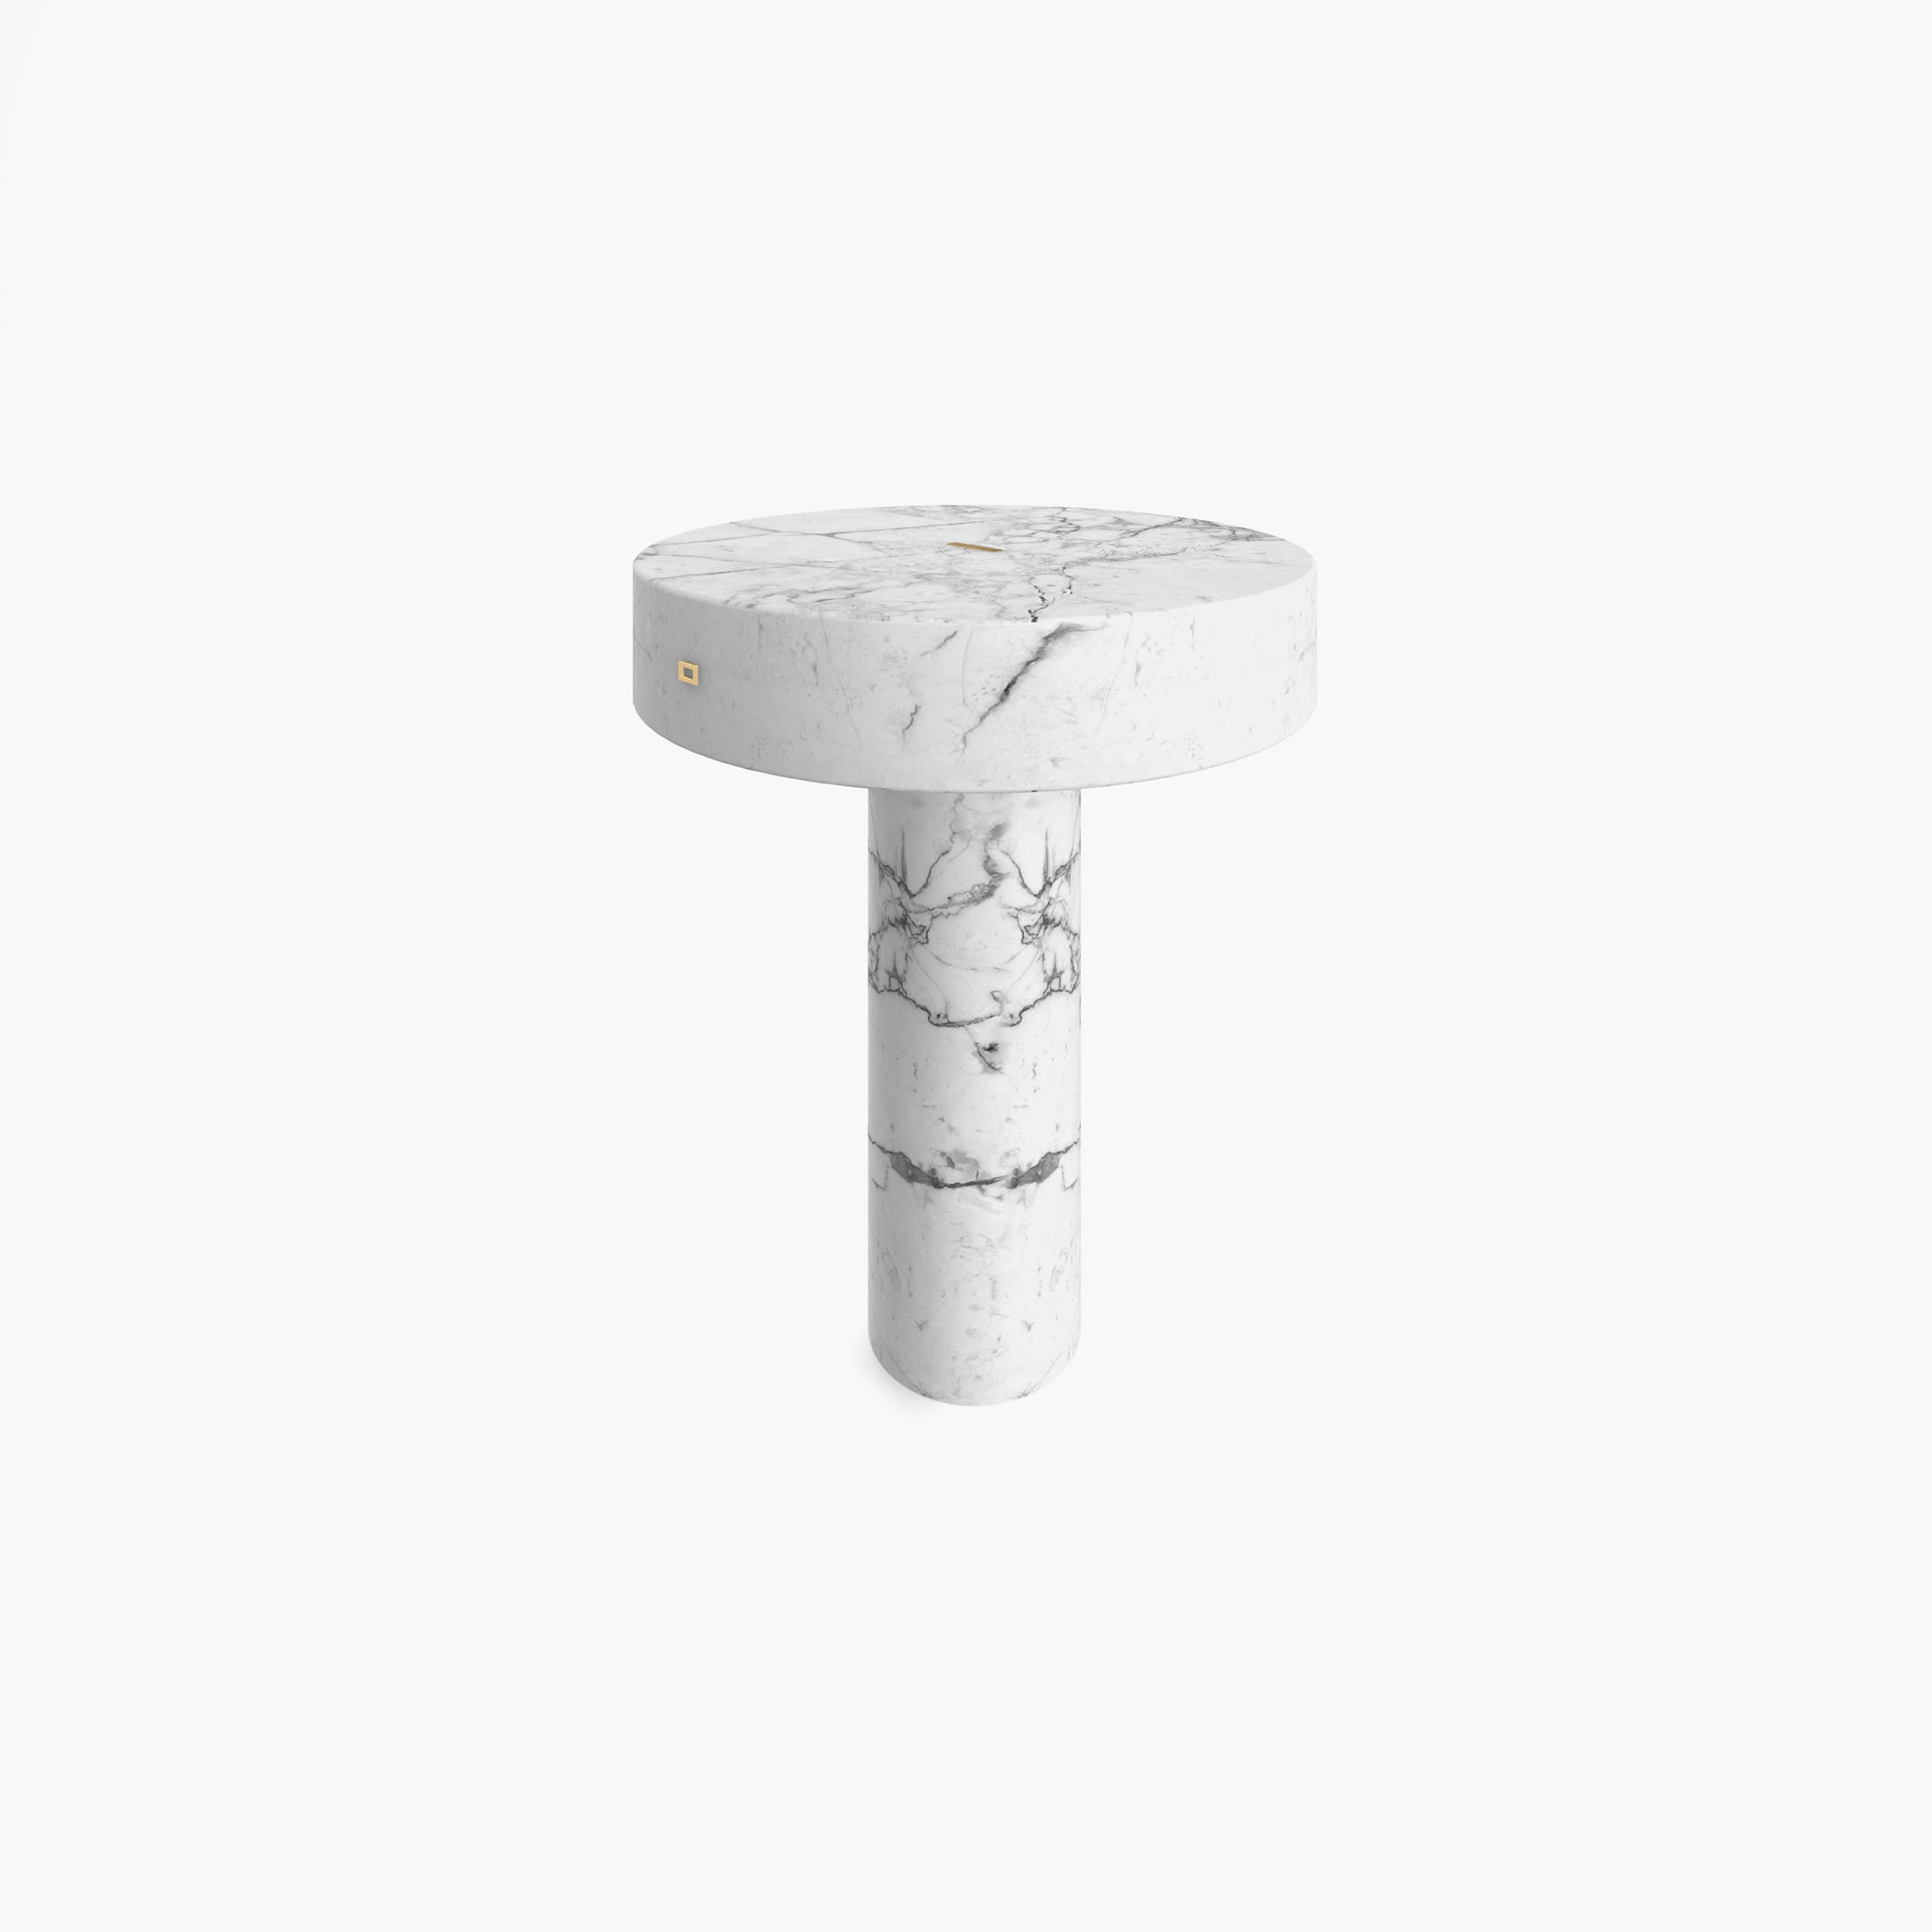 Side Table round high Cylinder cuboid prism White Arabescato Marble cubic Living Room masterpiece Side Tables FS 126 FELIX SCHWAKE